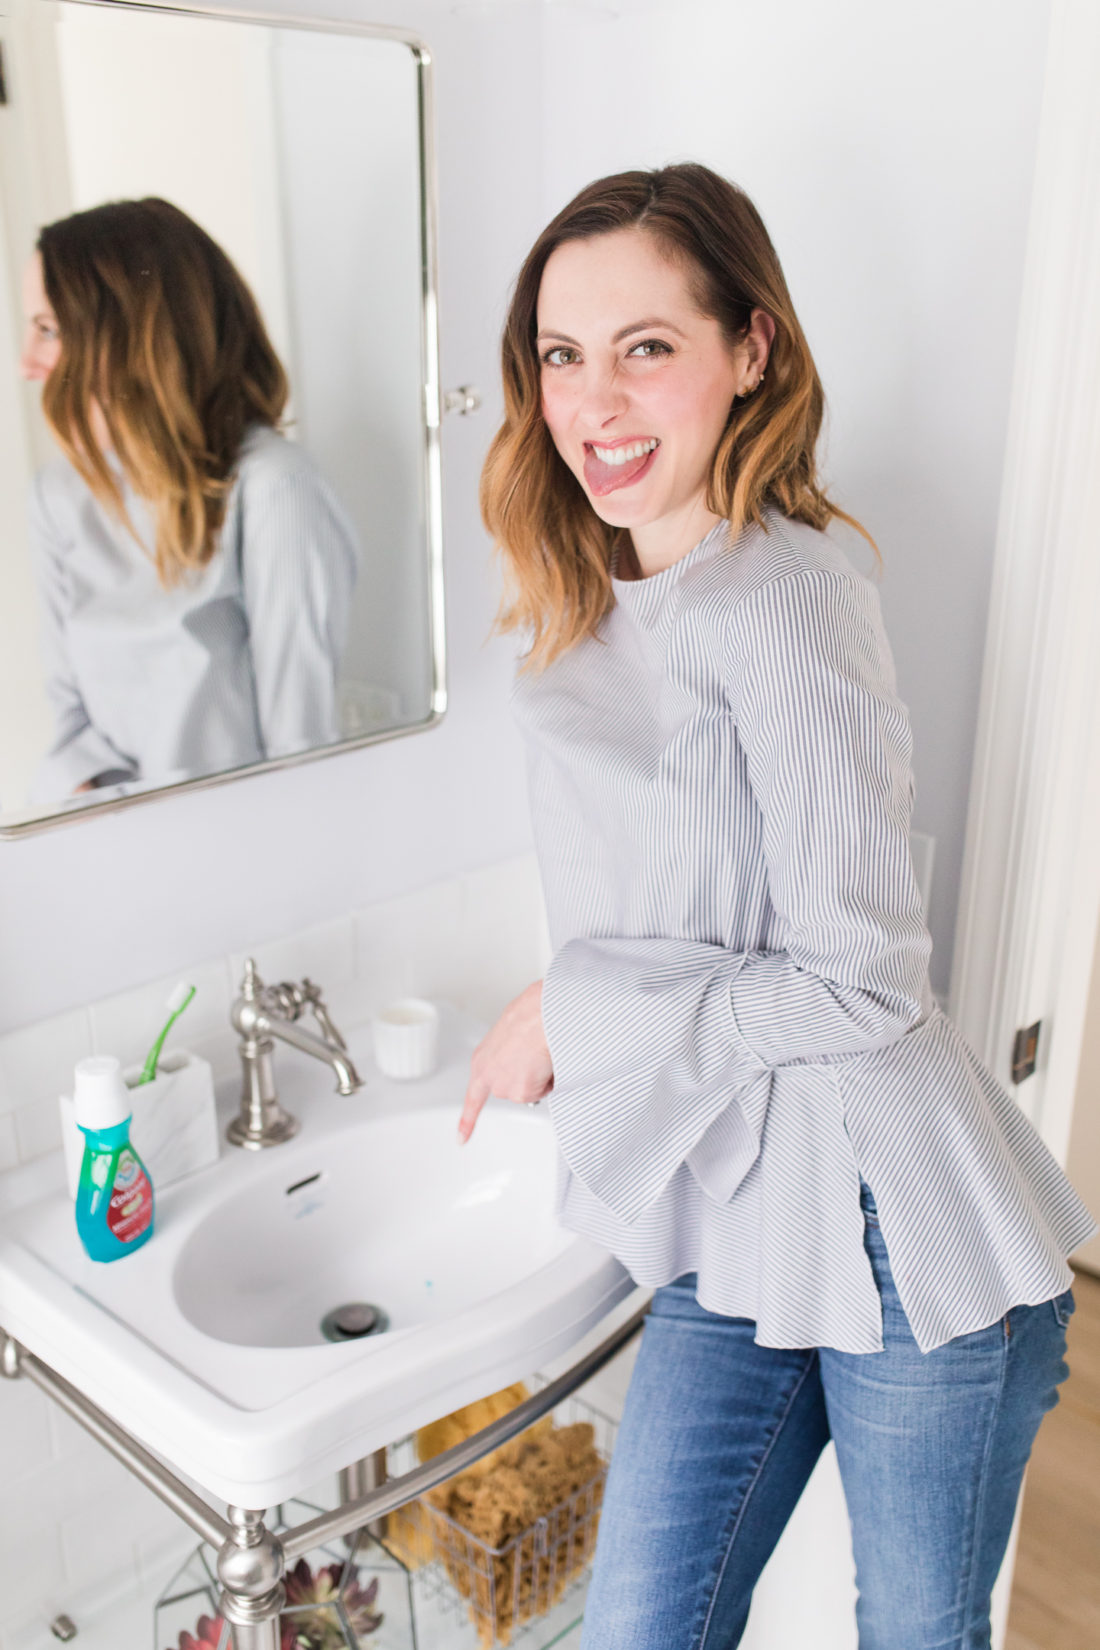 Eva Amurri Martino looks at the bacteria in the sink that have been killed by Colgate advanced health mouthwash